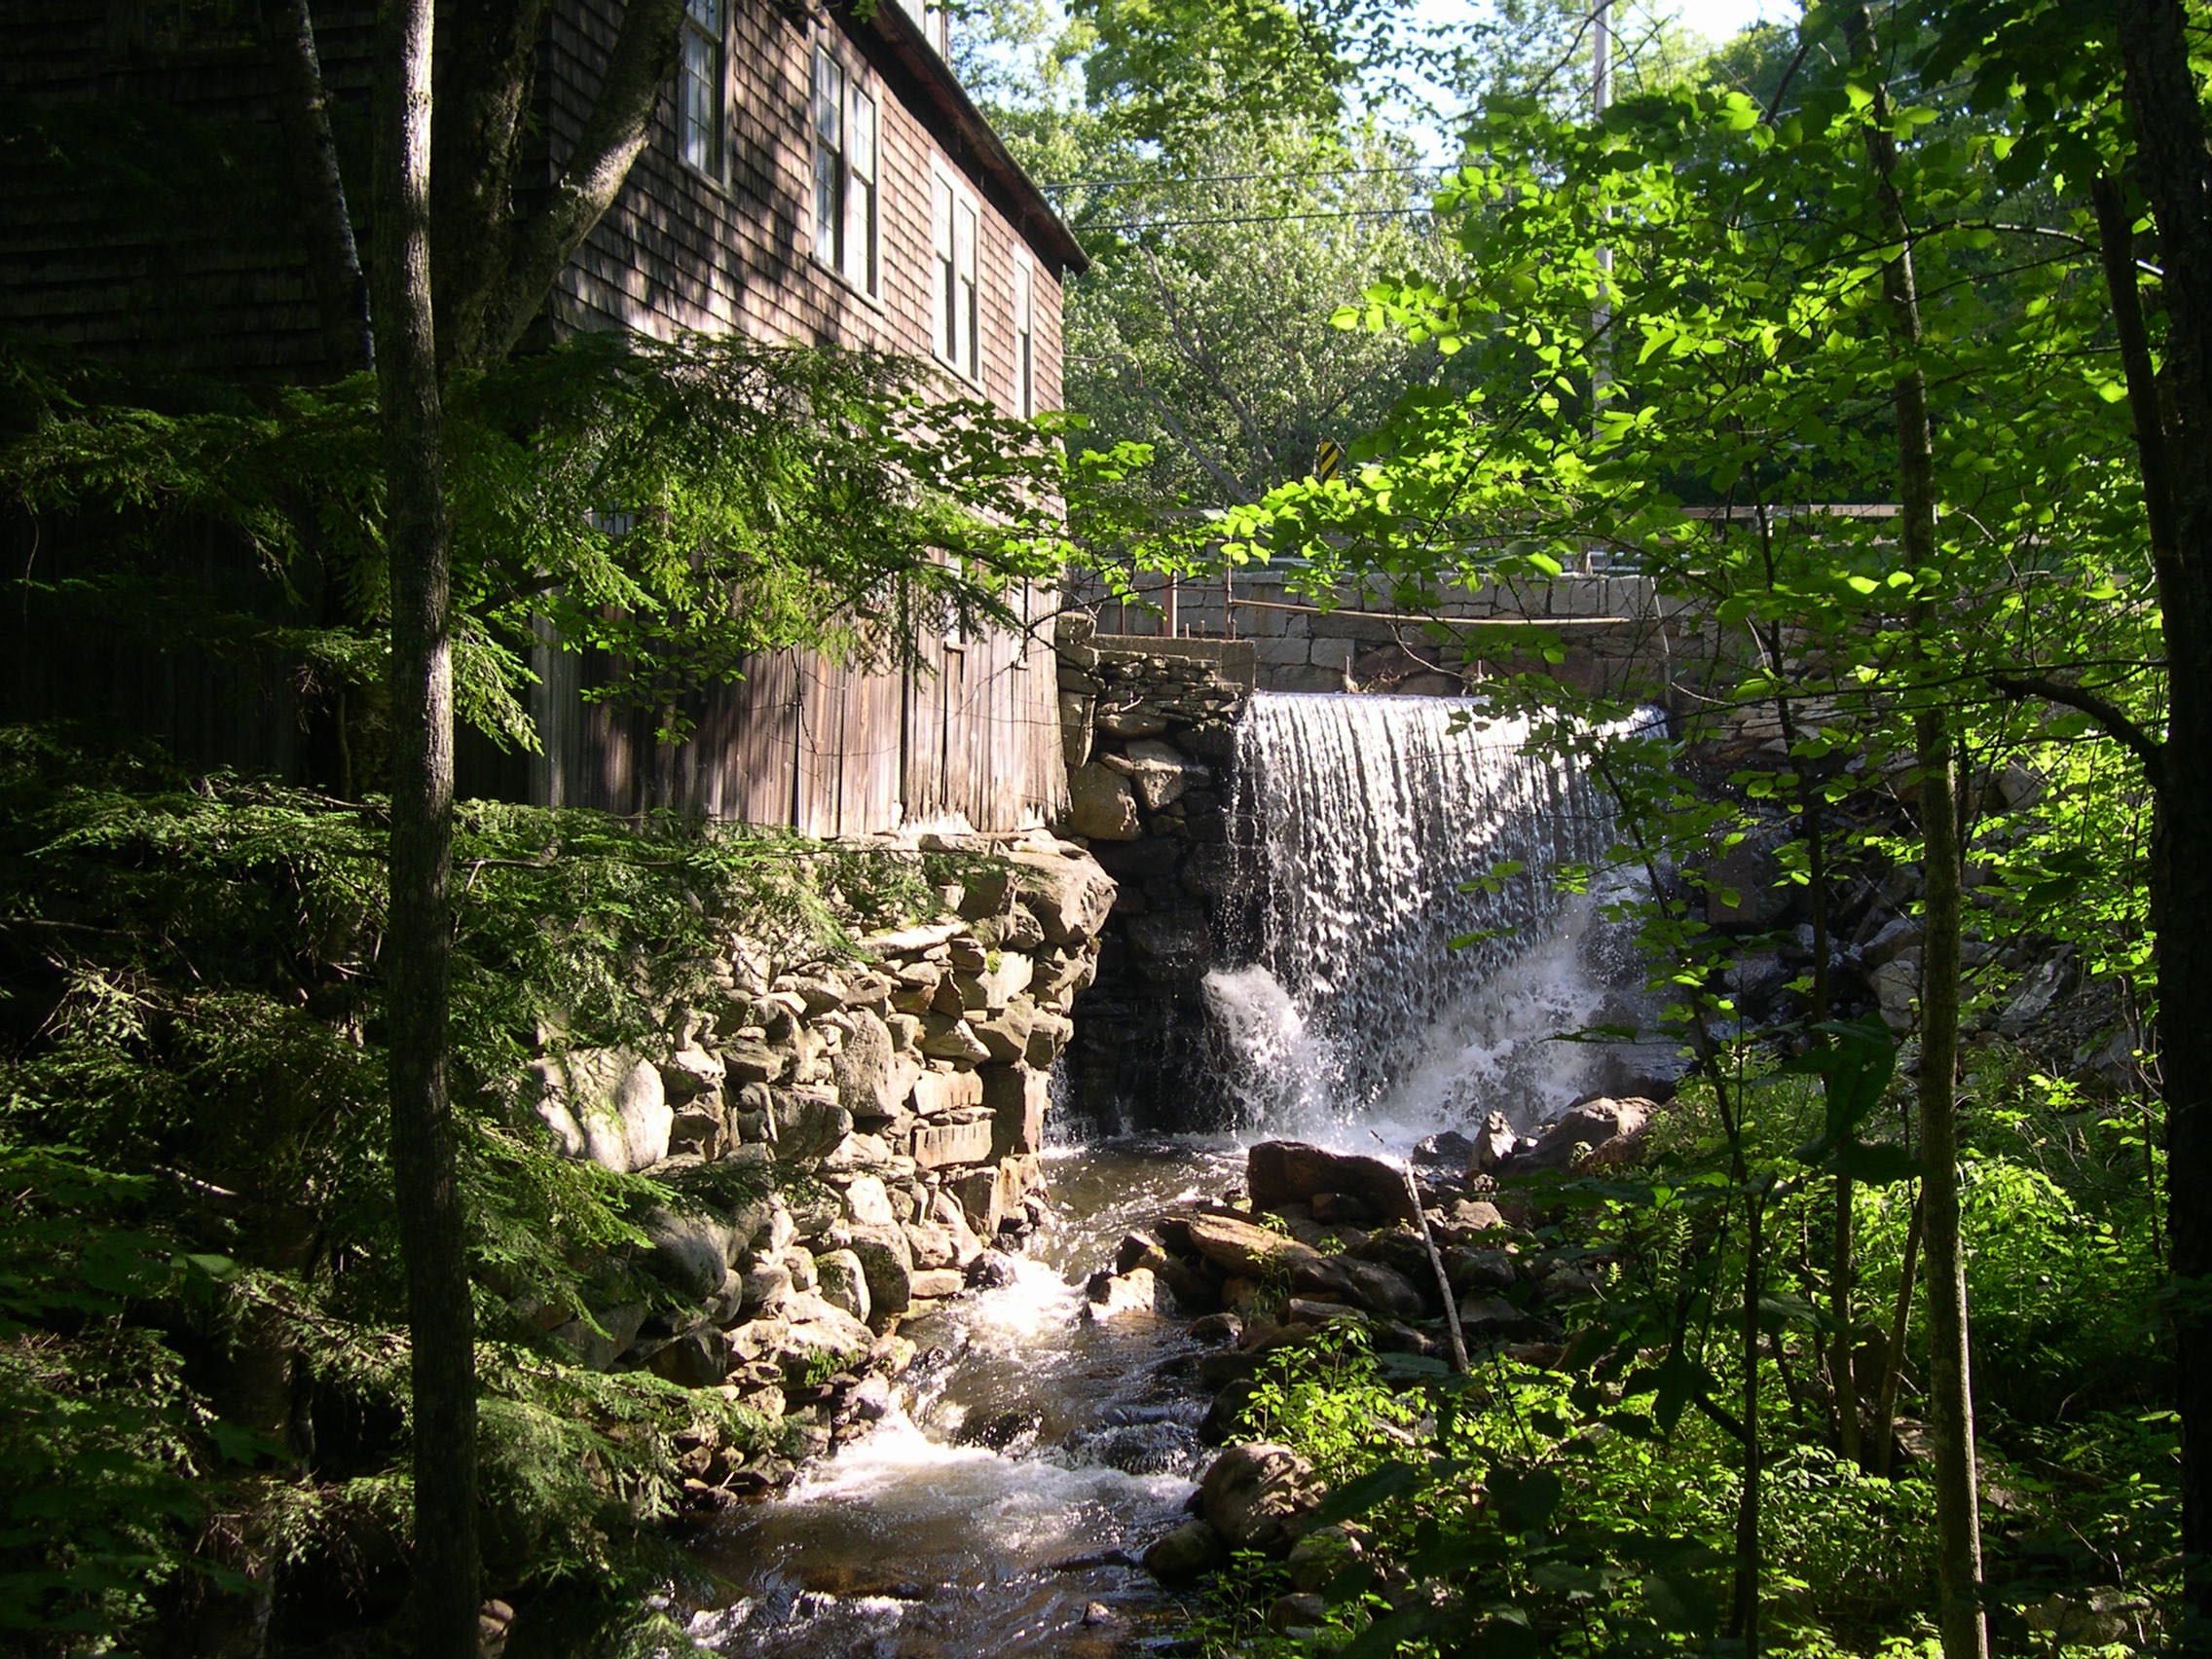 2009 - The mill and dam